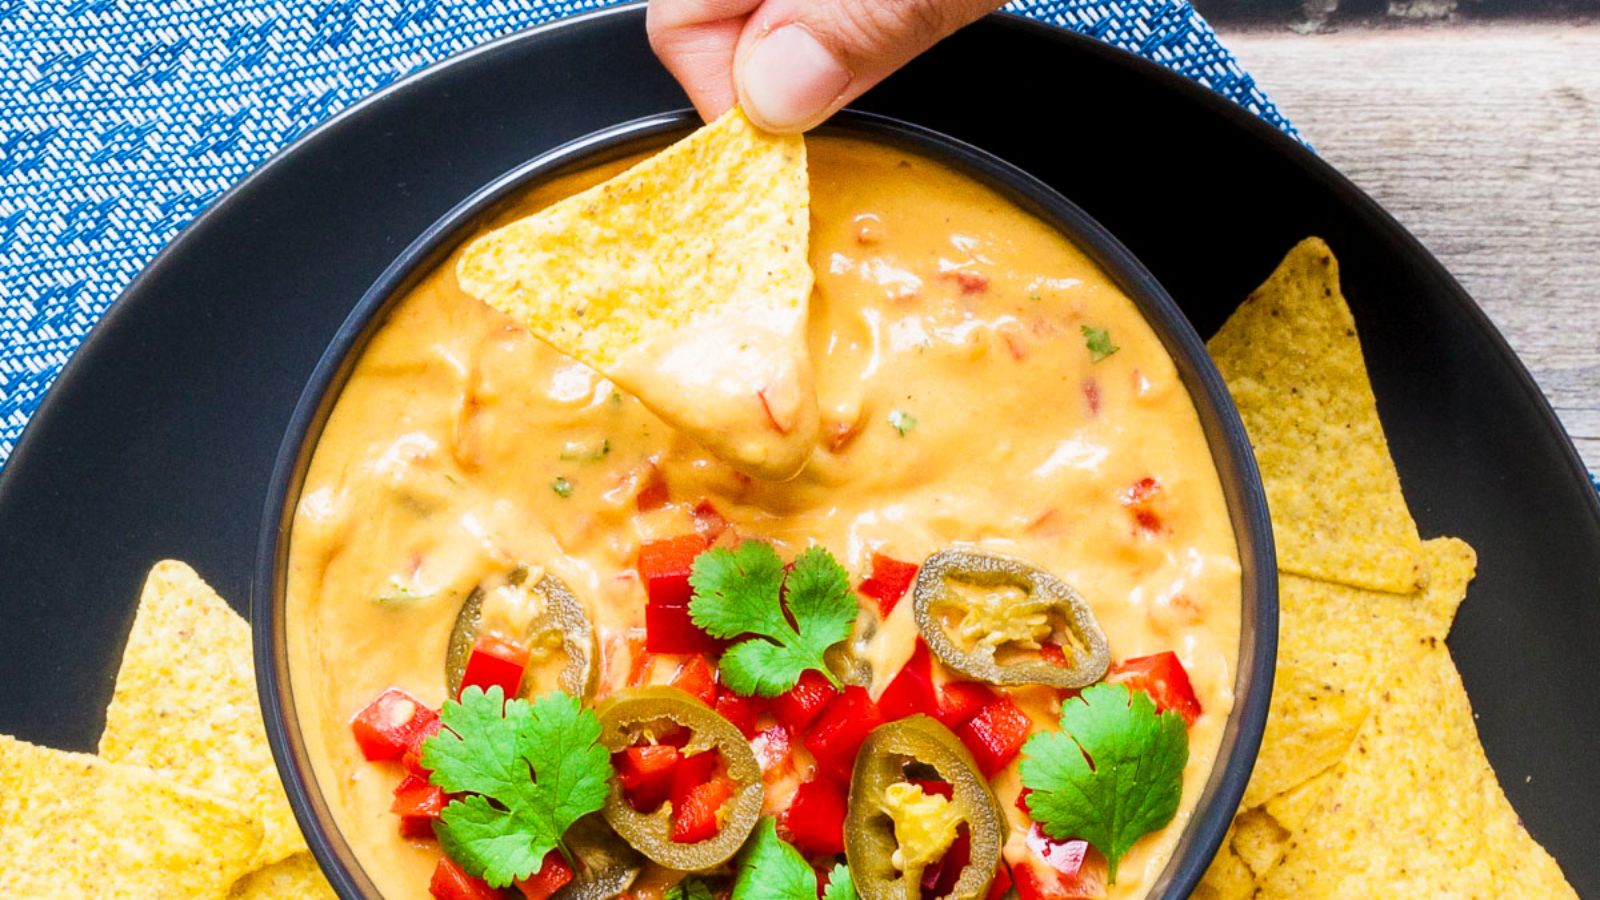 15 Guilt-Free Snacks and Dips to Add Some Spice to Your Cinco de Mayo